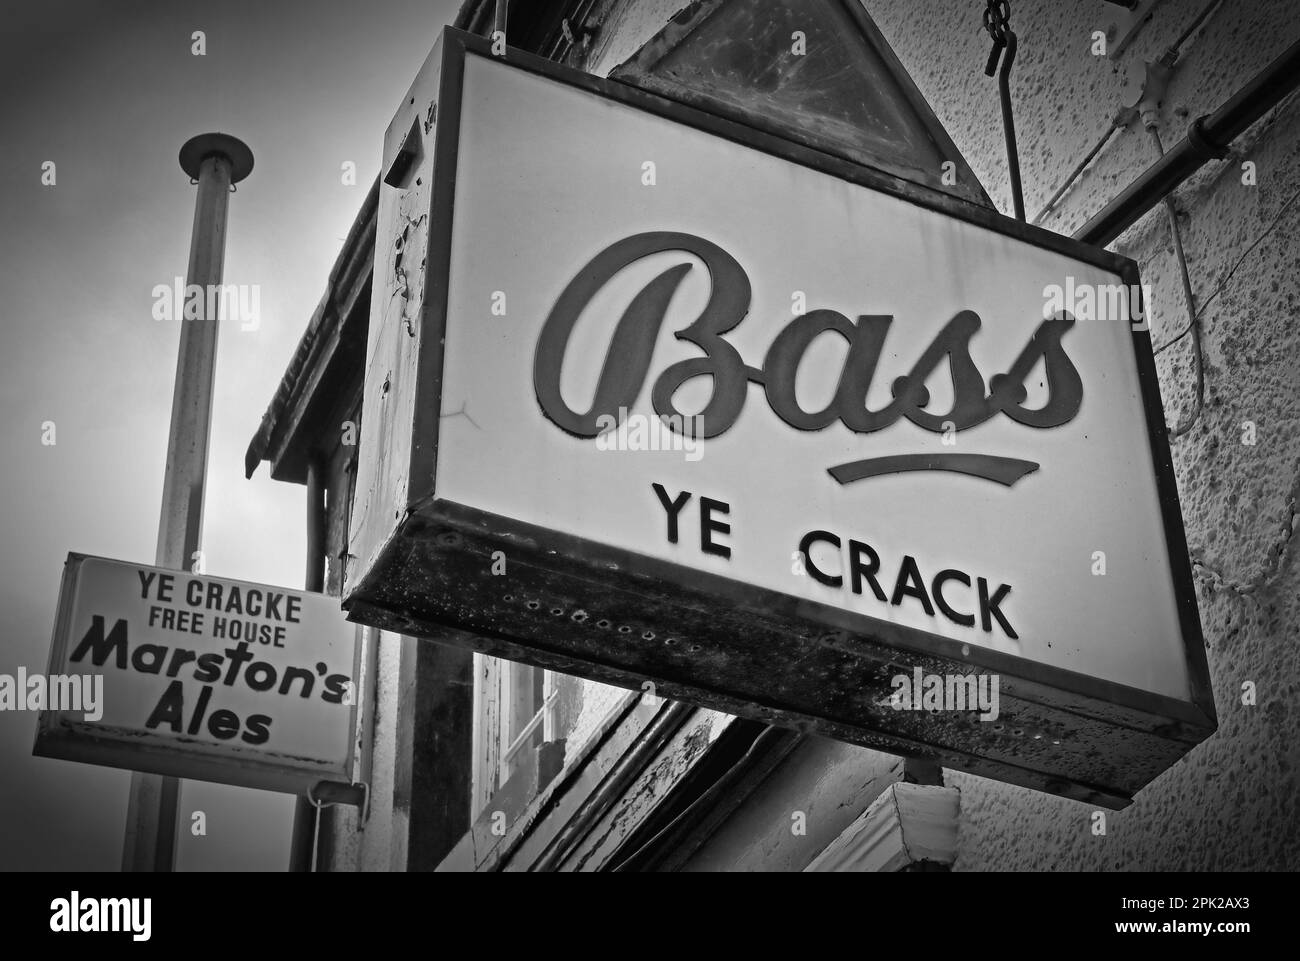 Ye Crack, historic Liverpool freehouse pub, where John Lennon drank, Bass and Marstons Ales signs, 13 Rice street, L1 9BB Stock Photo